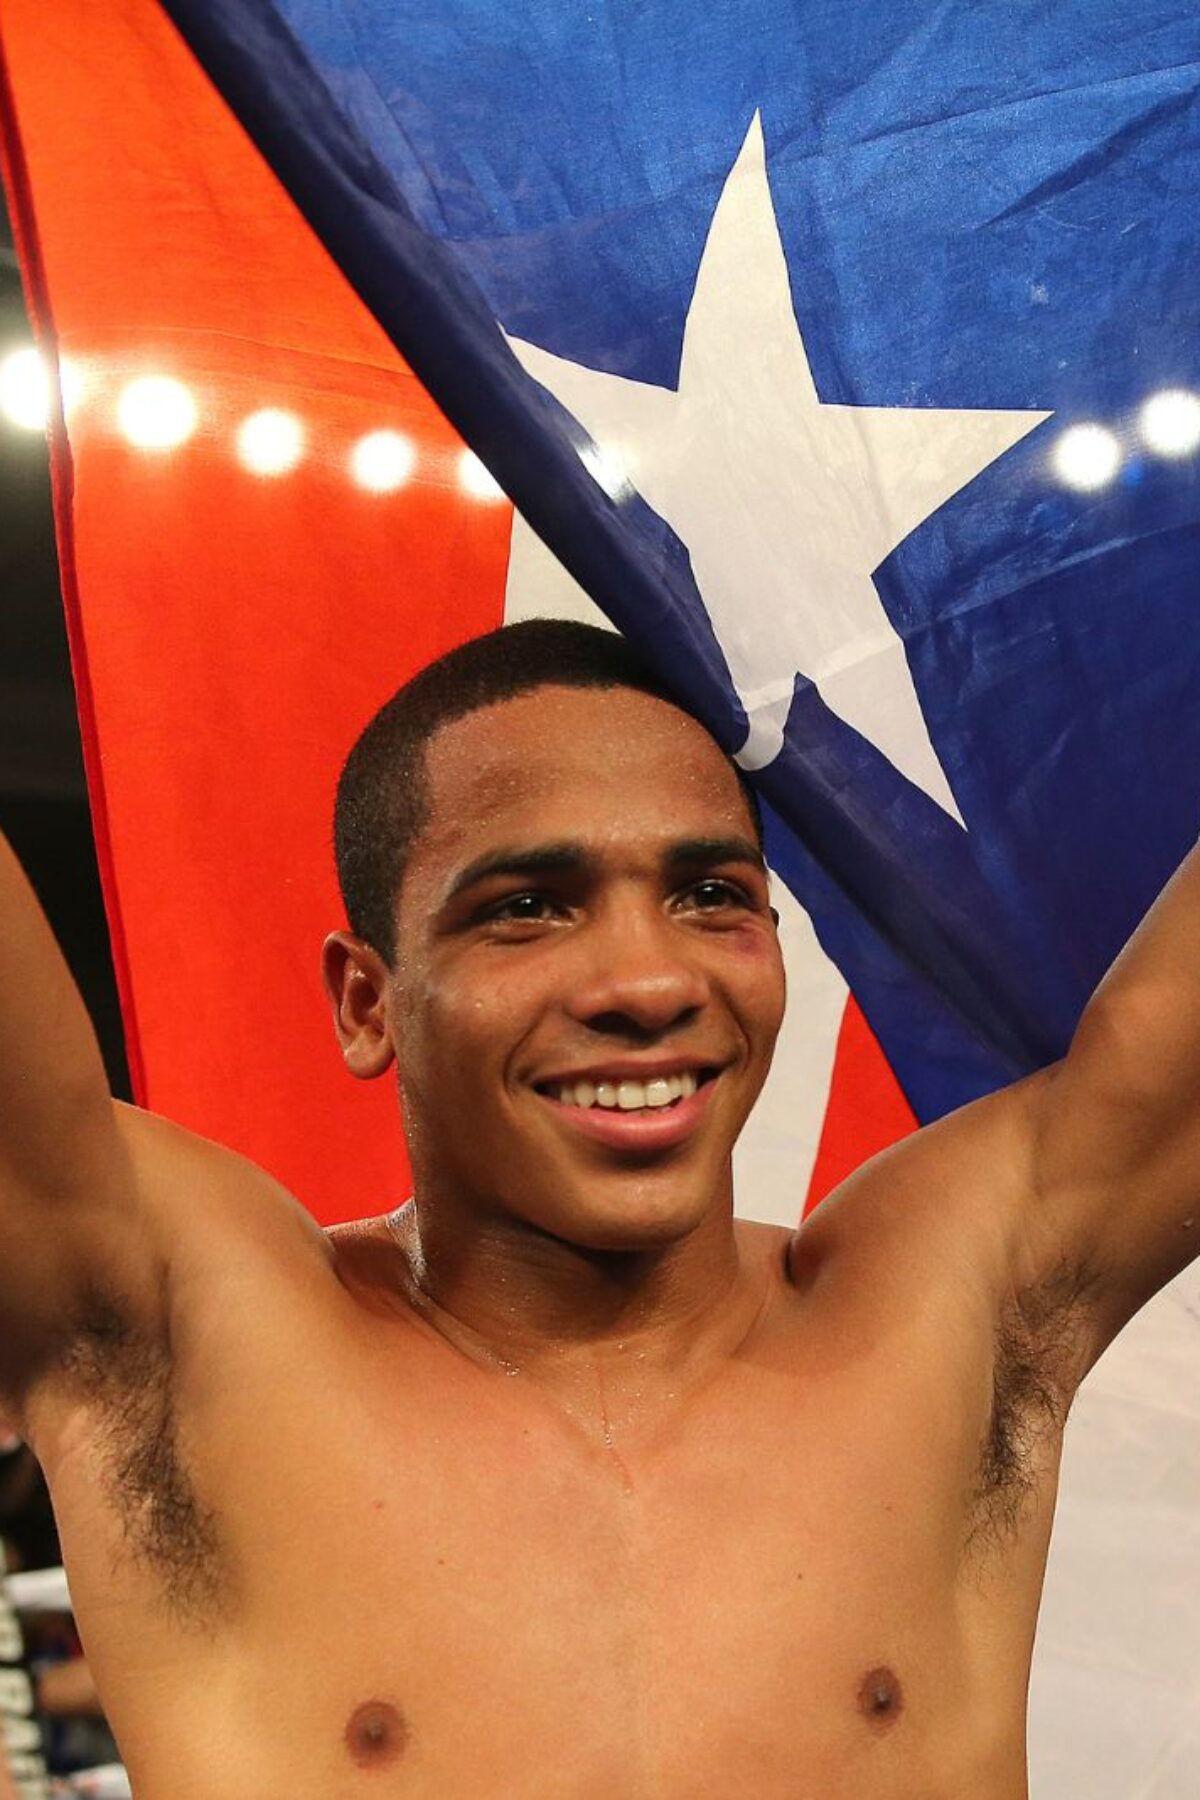 ORLANDO, FL - OCTOBER 04: Felix Verdejo of Puerto Rico celebrates after knocking out Sergio Villanueva of Mexico during their professional lightweight boxing match at the Baha Shriners Auditorium & Events Center on October 4, 2014 in Orlando, Florida. (Photo by Alex Menendez/Getty Images)